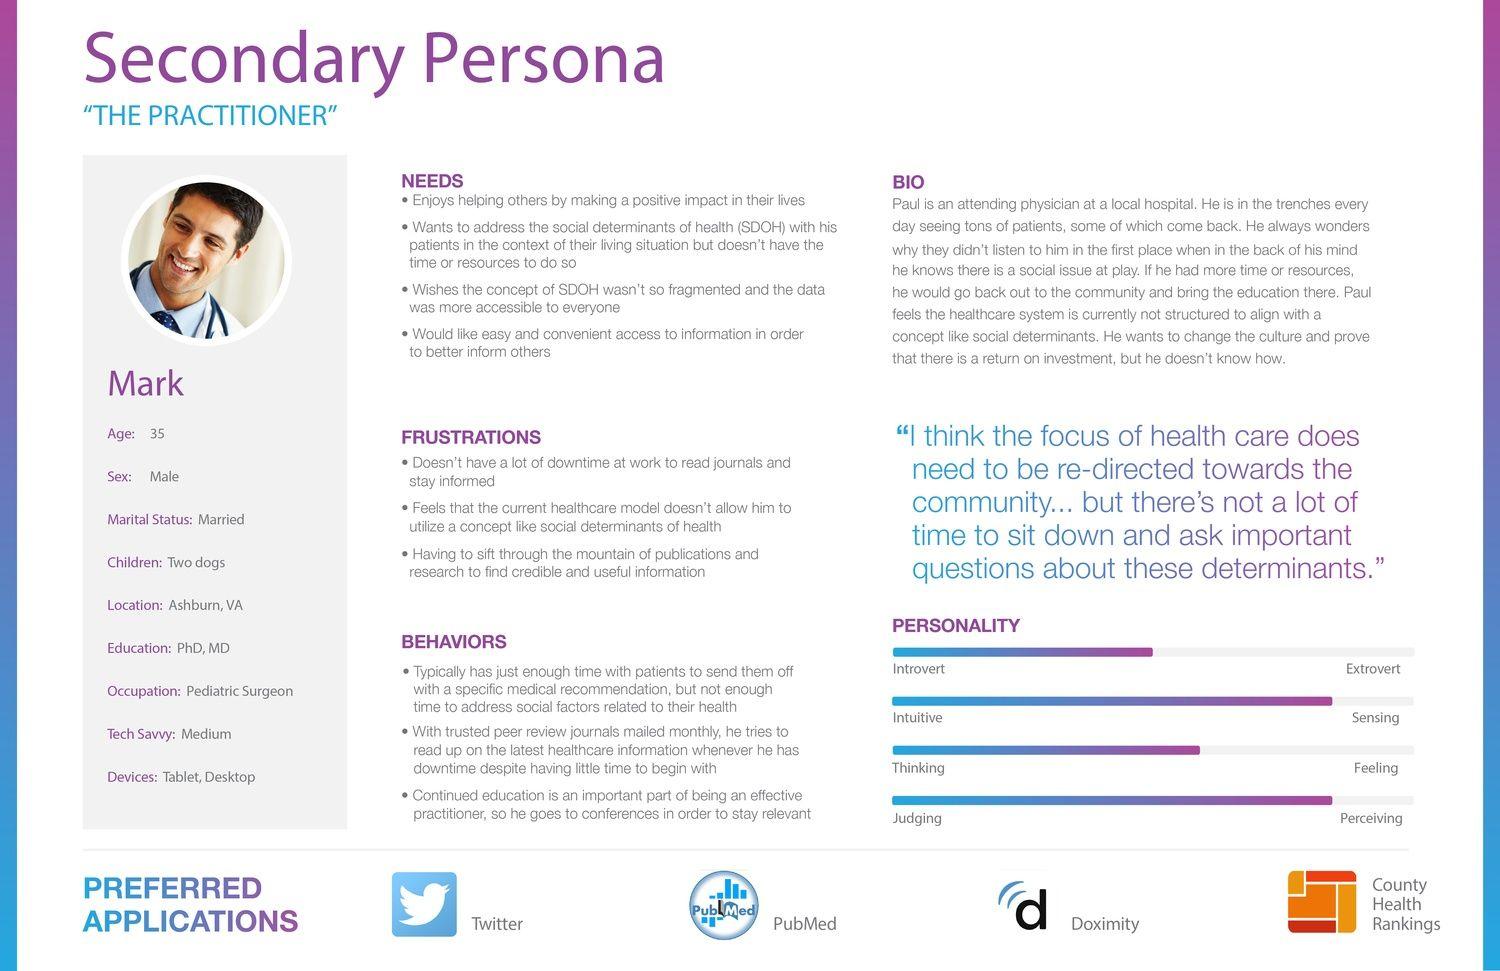 Screenshot of "The Practitioner" persona's profile.